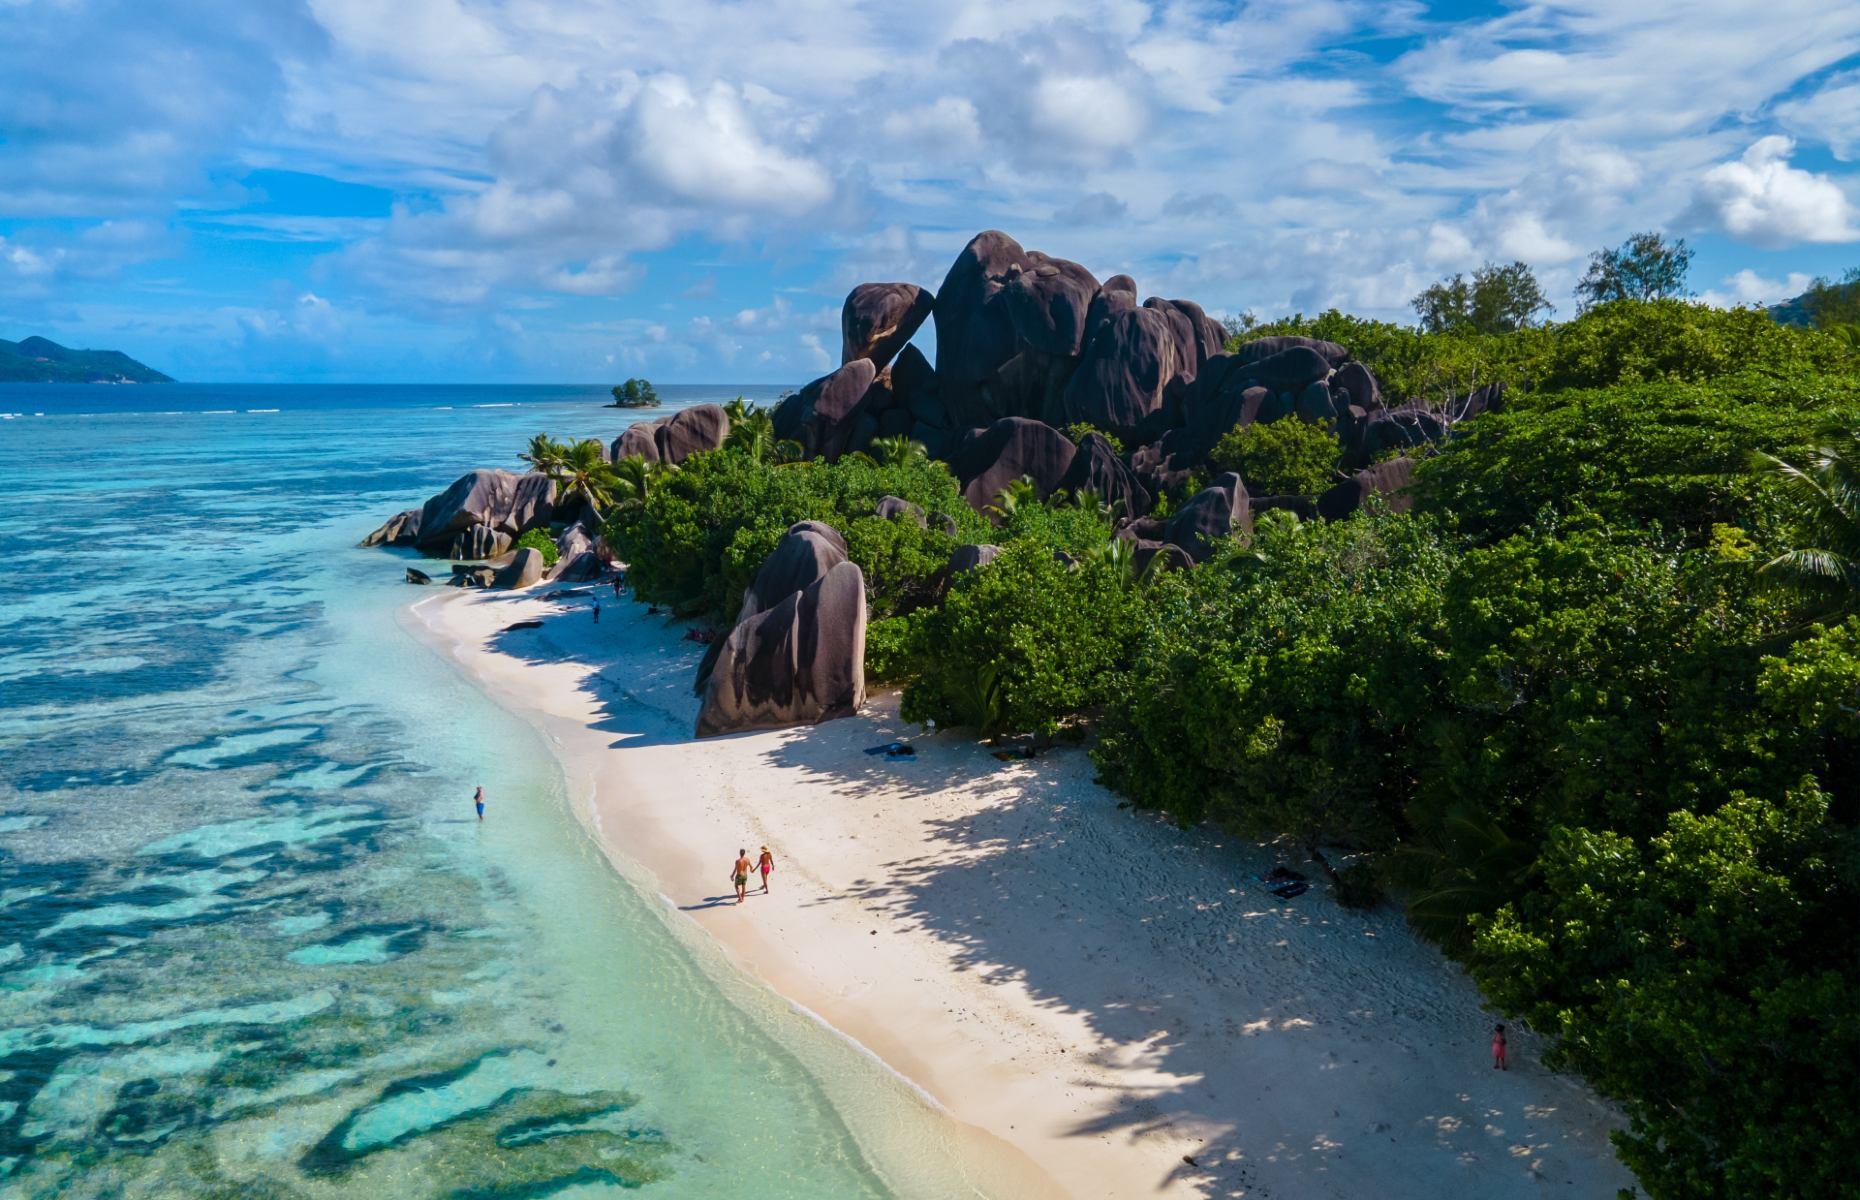 <p>Famed for their idyllic sandy beaches, the Seychelles have seen a huge uptick in tourism in the last couple of decades. In fact, in 2018, the islands hosted around 360,000 tourists – roughly four times the country’s population. To keep tourism sustainable, the government has placed a moratorium on the building of large resorts in favor of smaller, locally-run lodgings, while there's also been talk of putting a cap on total visitor numbers. </p>